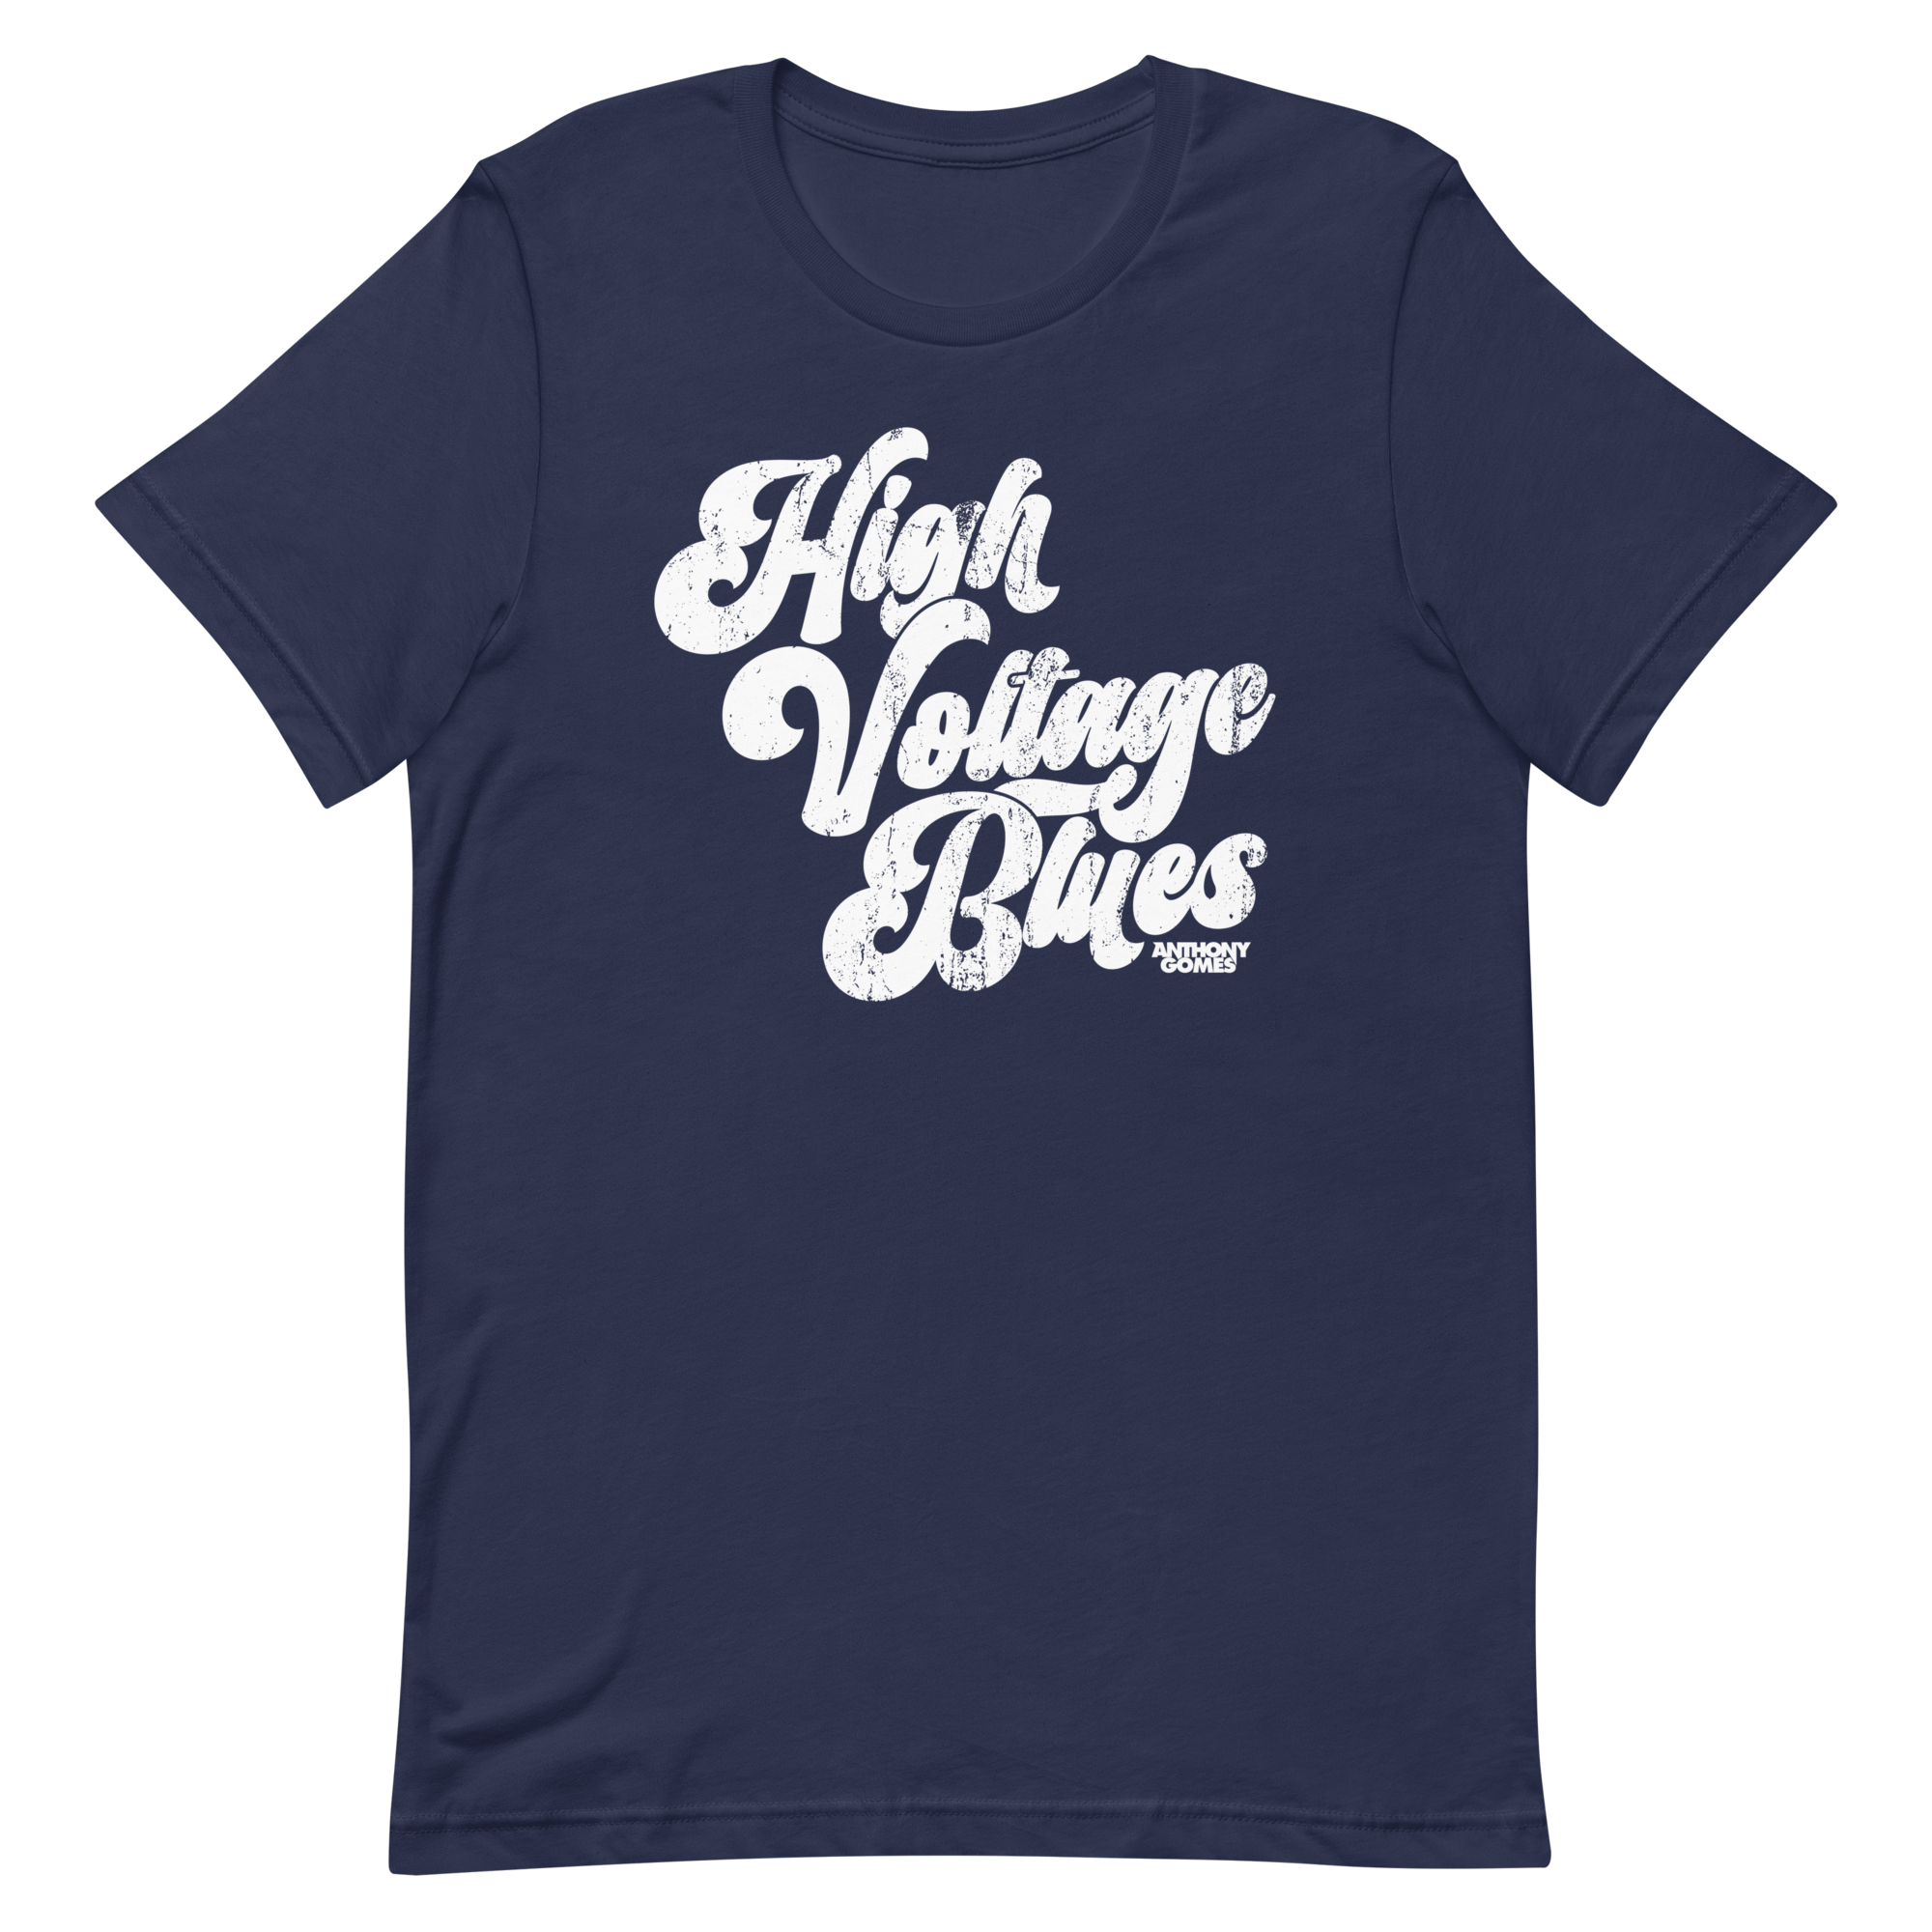 Vintage HVB Unisex T-Shirt (Available in 3 Colors) S - 5XL